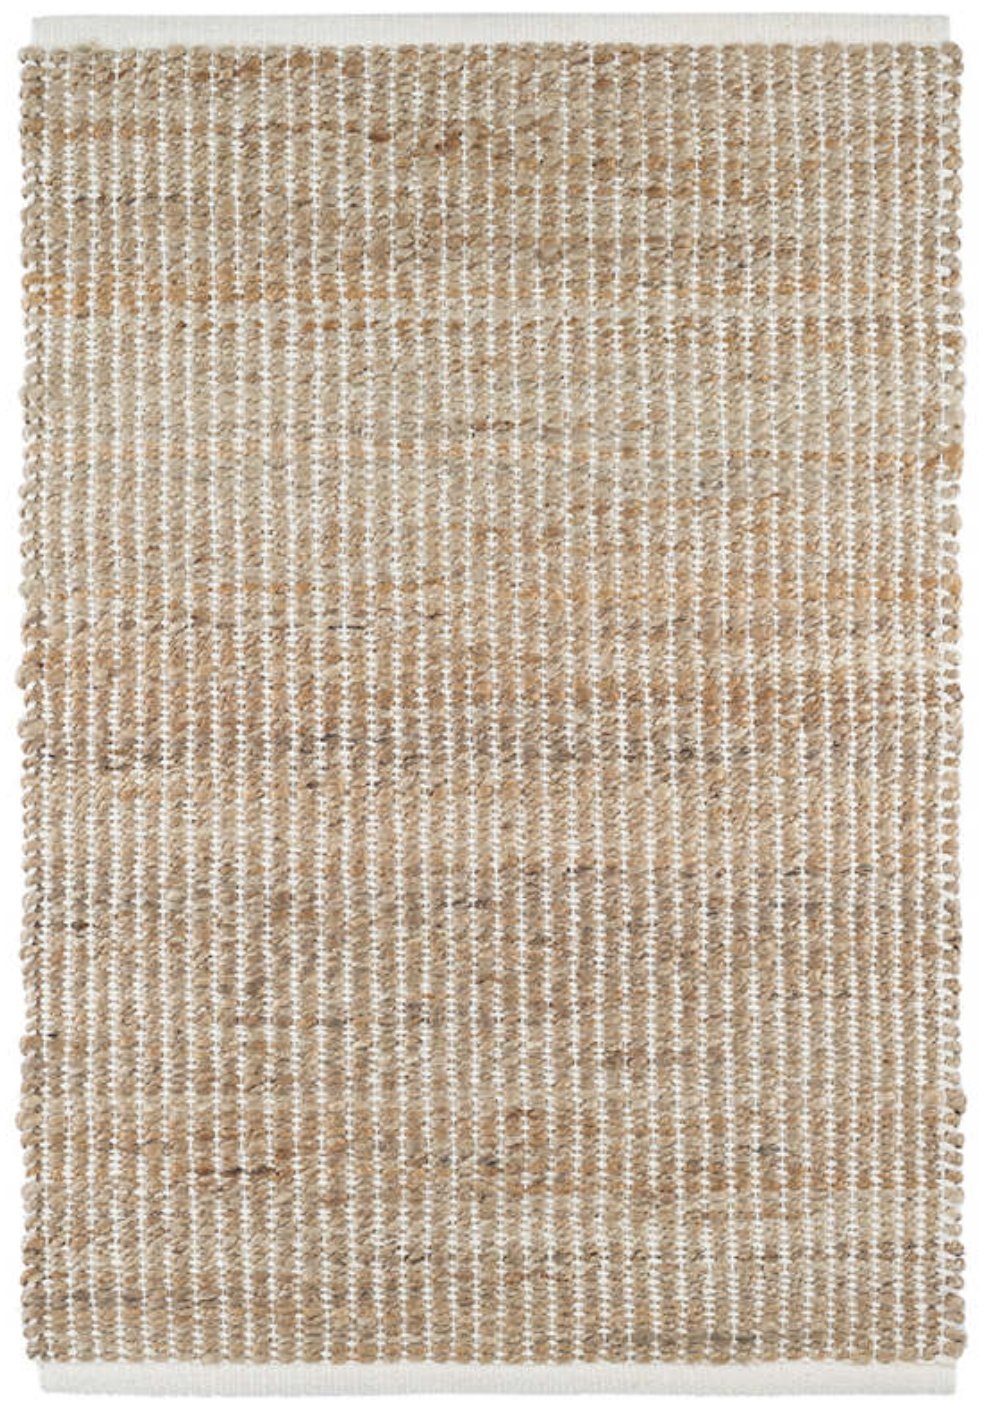 GRIDWORK IVORY WOVEN JUTE RUG - 10'x14' - Image 0